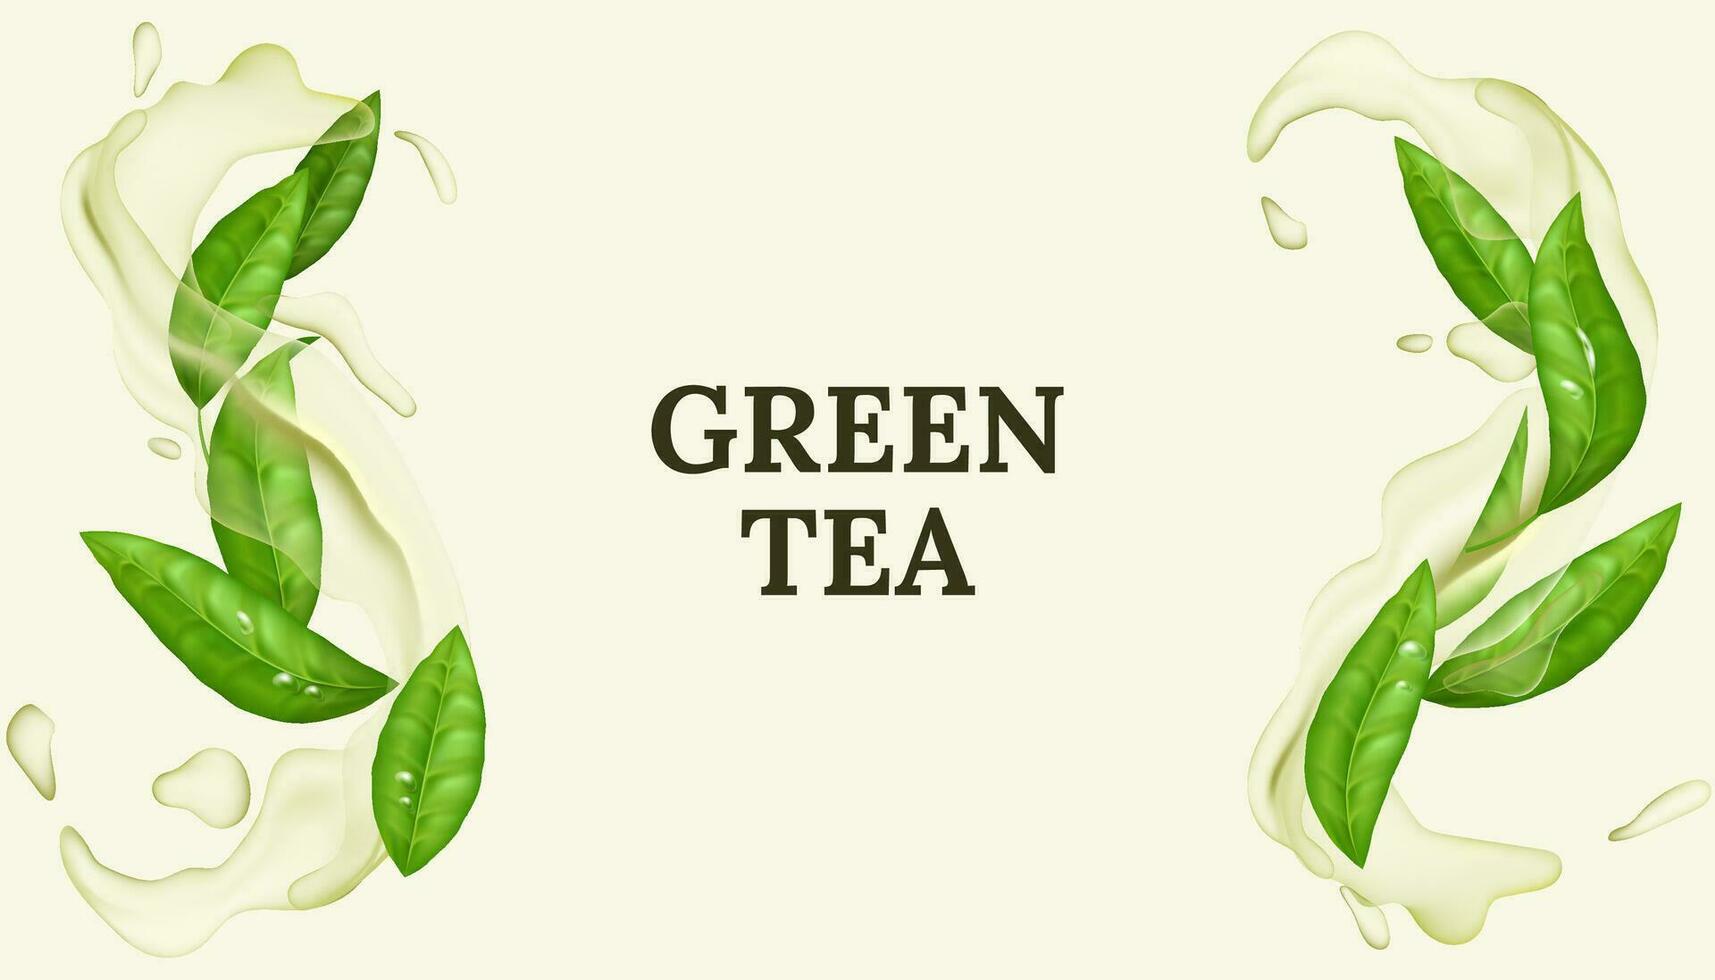 Refreshing green tea leaf in 3D vector illustration. Natural and organic, with a splash of water creating a cool and clean motion. Spearmint aroma and fresh minty flavor.